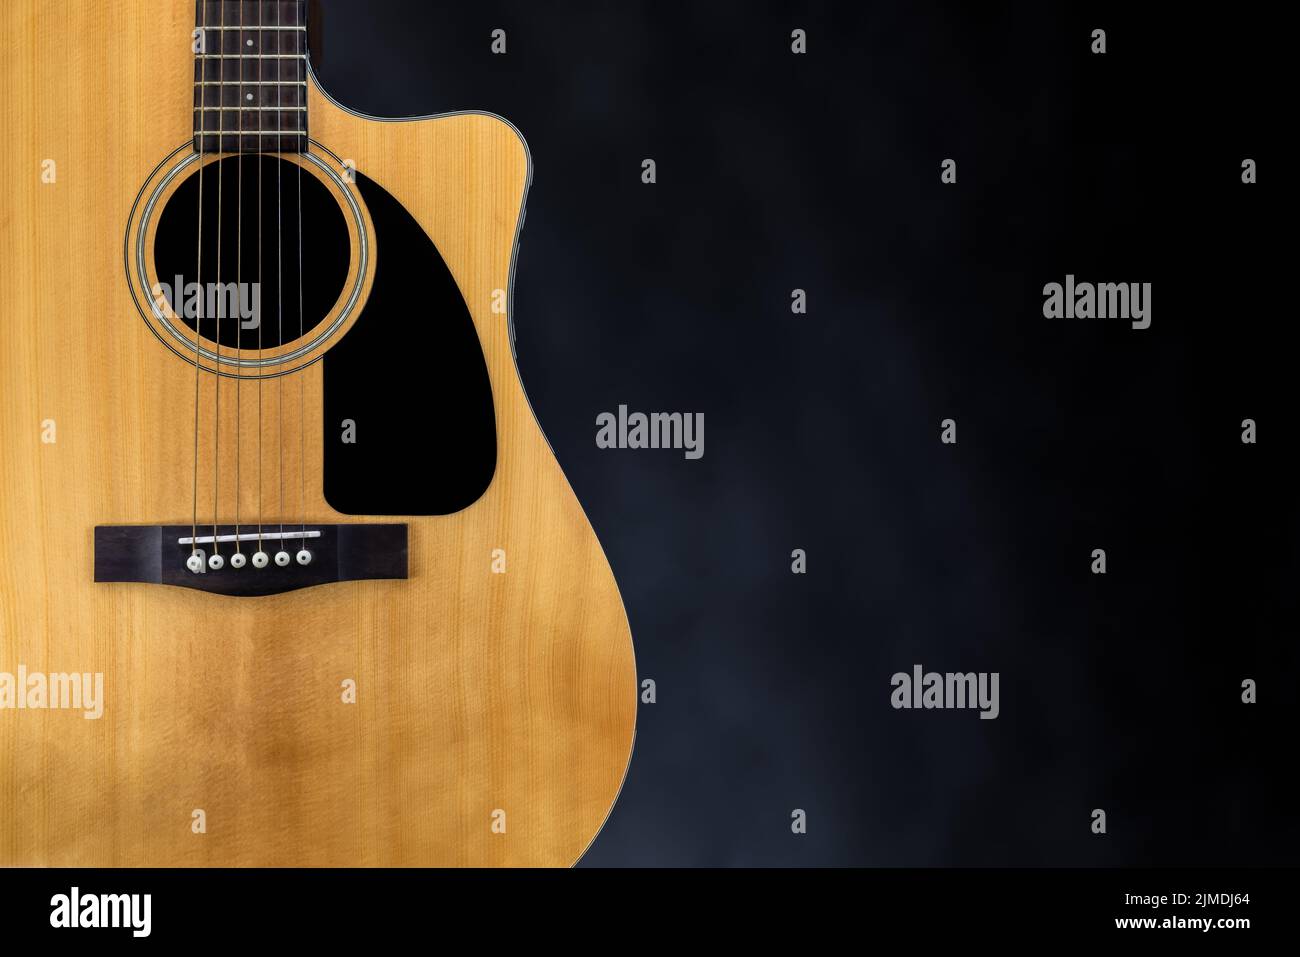 Sound board of classic yellow acoustic guitar with black pickguard and strings near isolated black background Stock Photo